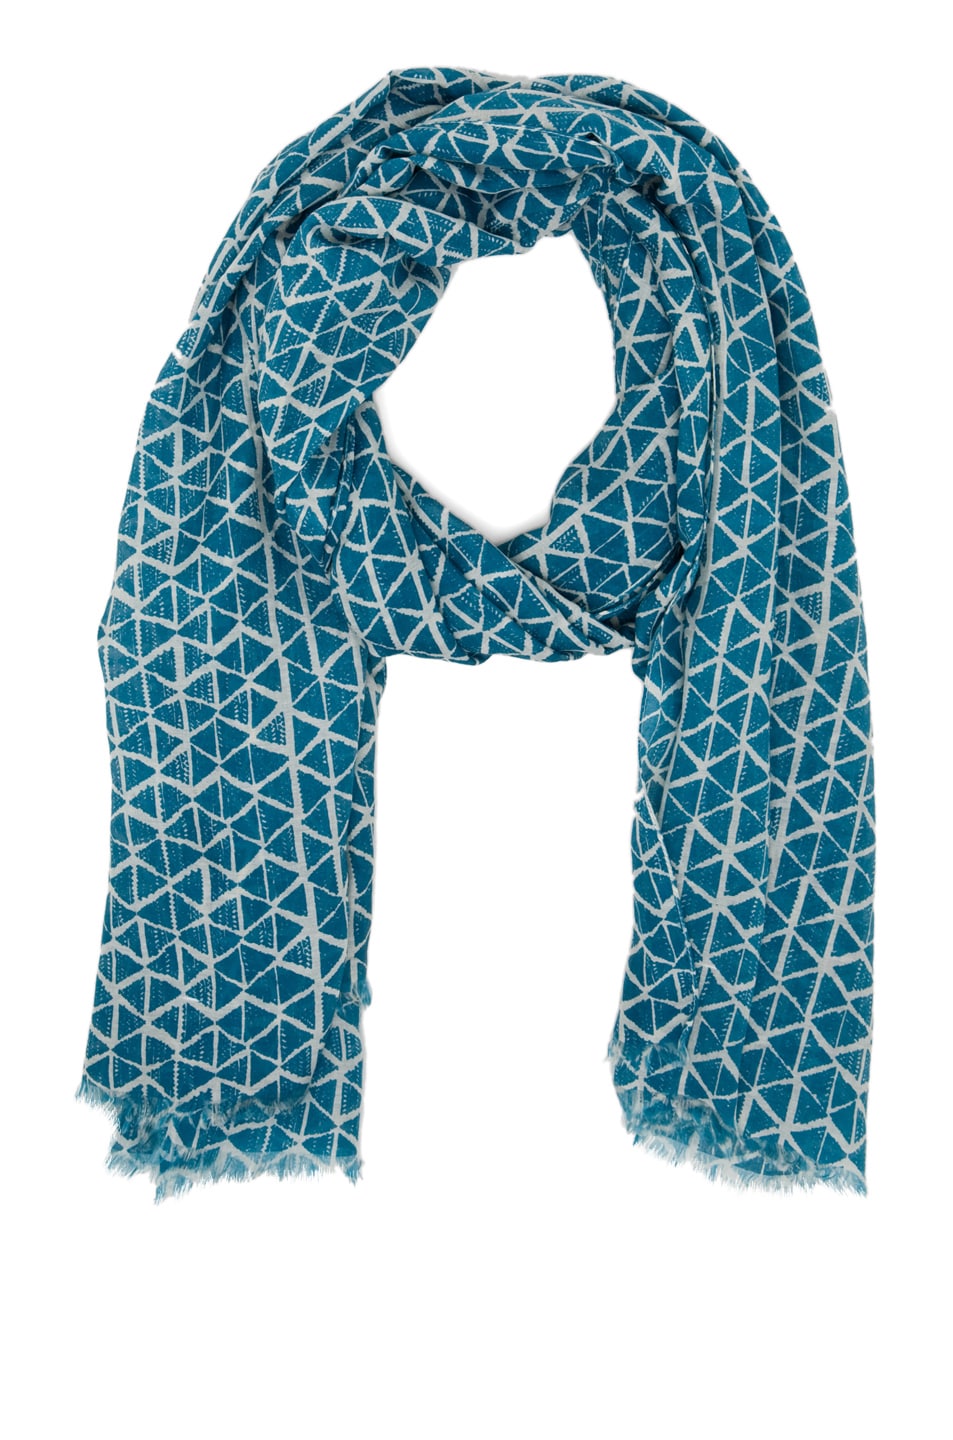 Image 1 of Kelly Wearstler Triangle Lattice Scarf in Turquoise & Ivory